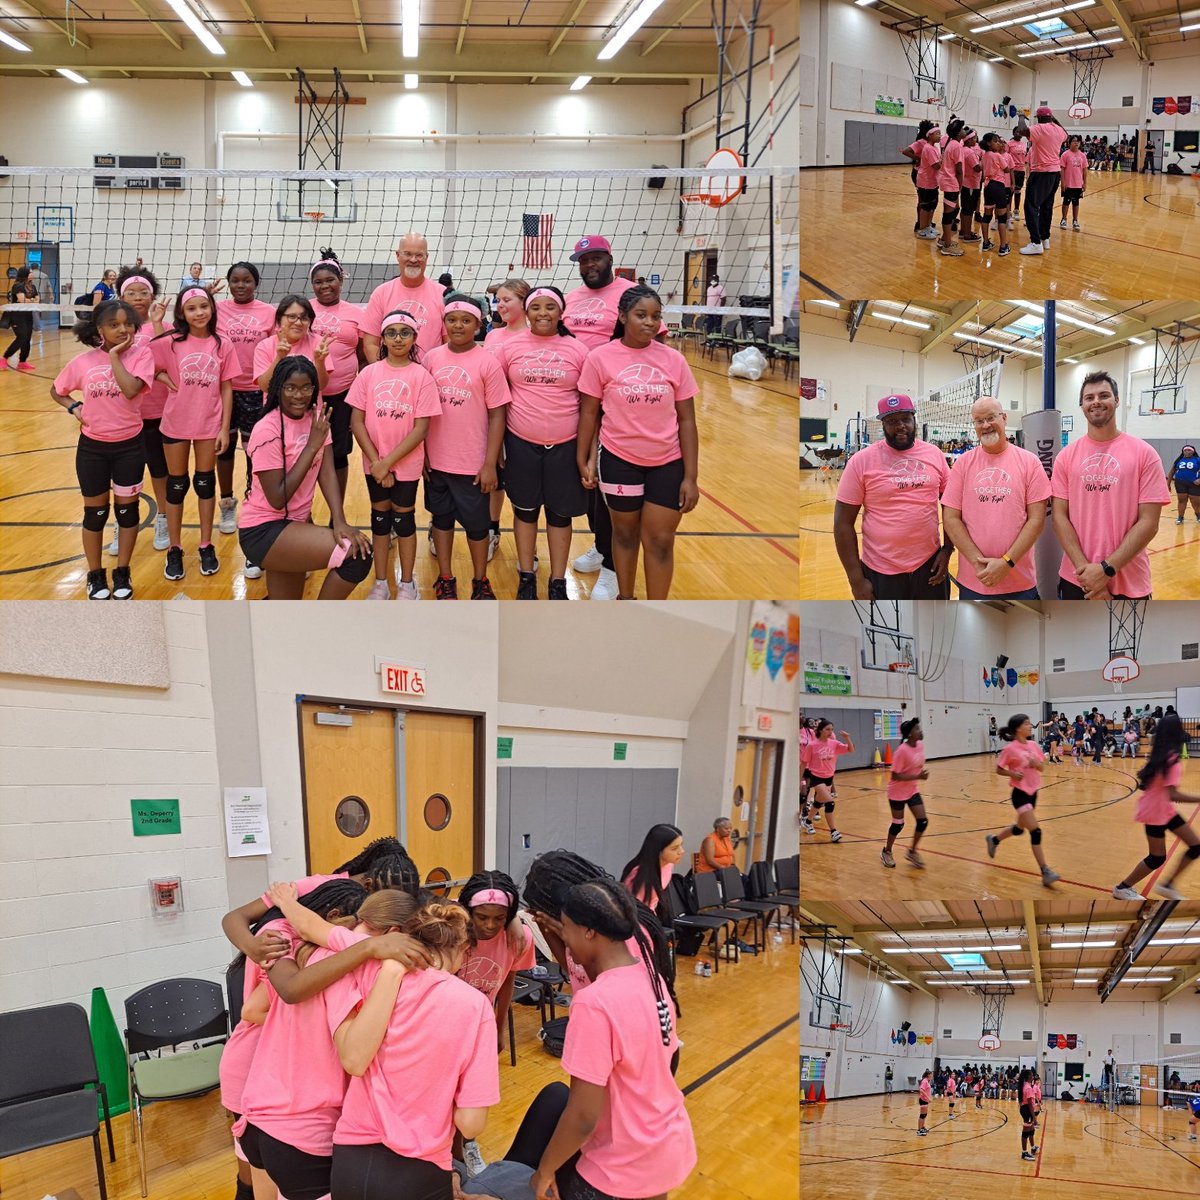 We are so proud of our volleyball community for supporting cancer awareness. Both teams wore pink and showed tremendous sportsmanship! Way to go, Global! Thank you, Coach Carlson and Coach James!! #stempride🌱 @STEMEdCT @msboratko @corinne_barney @HartfordSuper @HPSArtsWellness